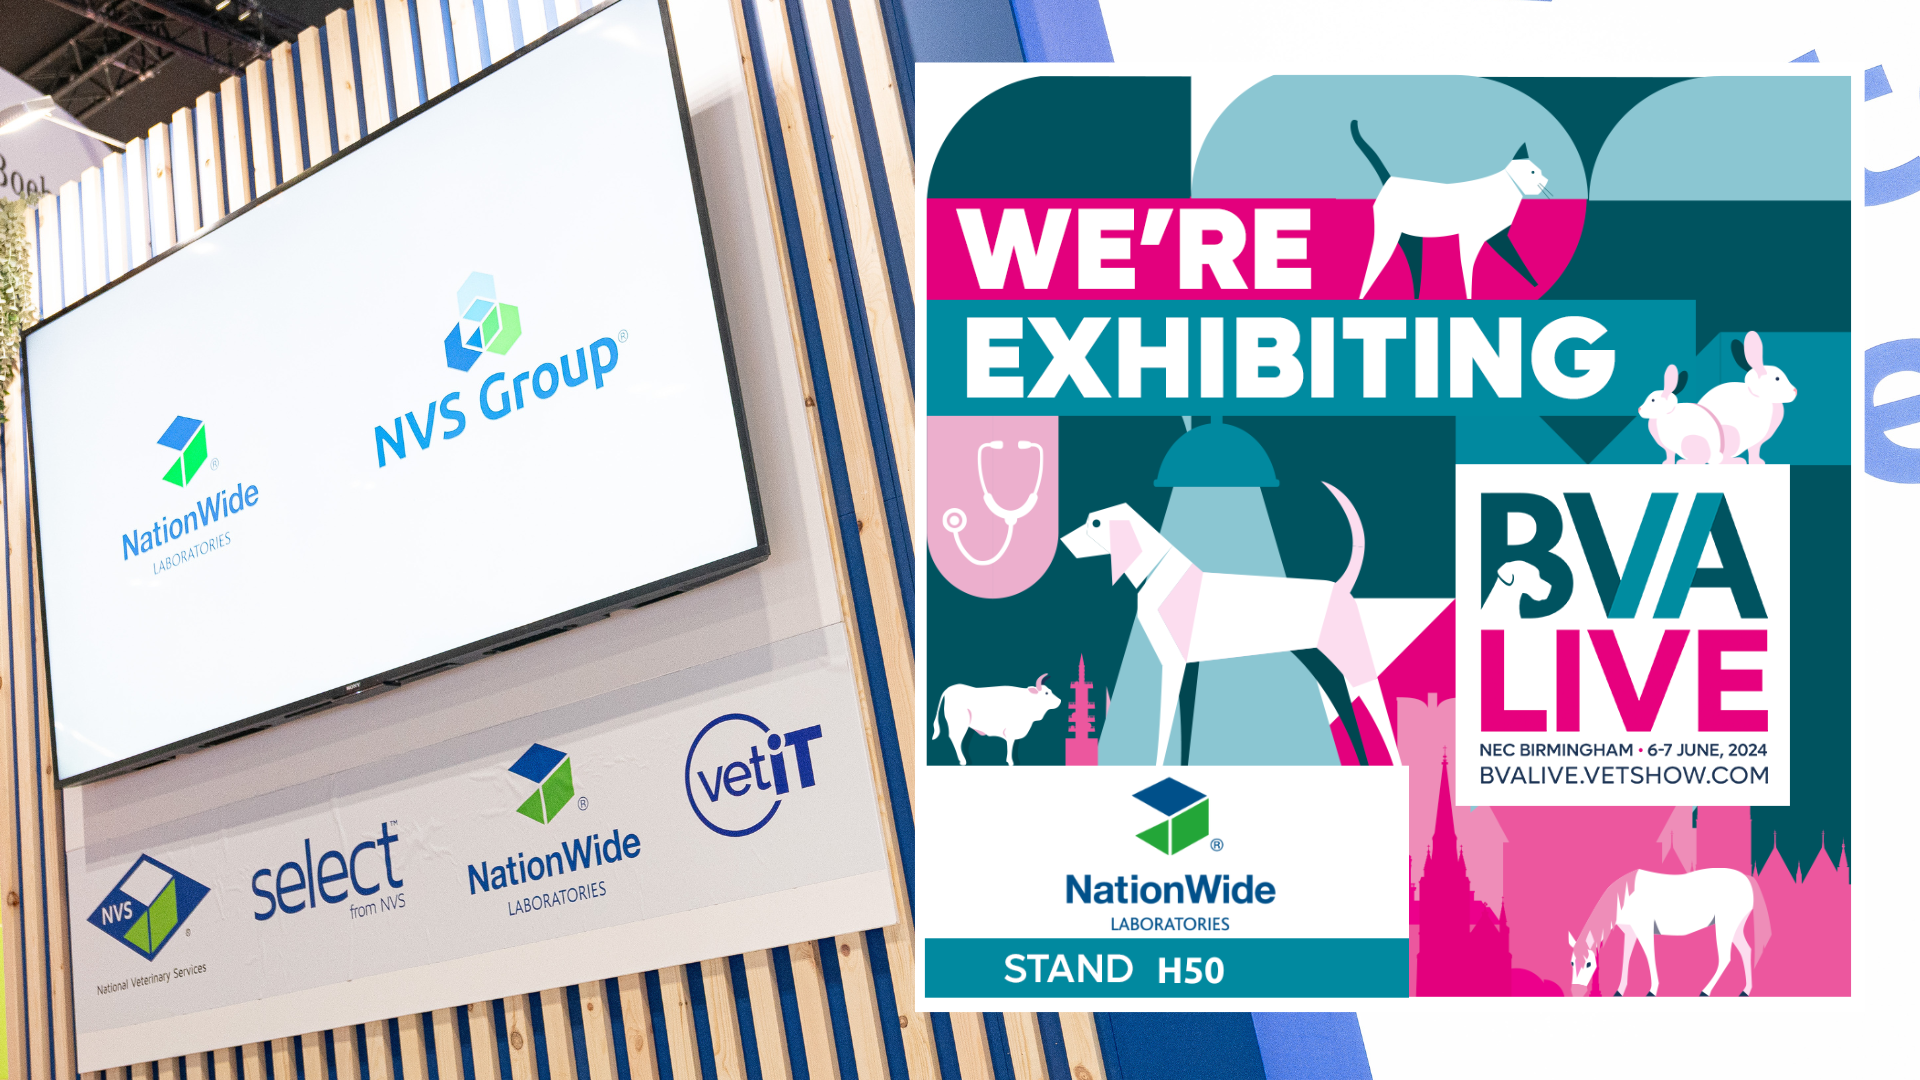 NationWide Laboratories offers a helping hand to new veterinary practices at BVA Live